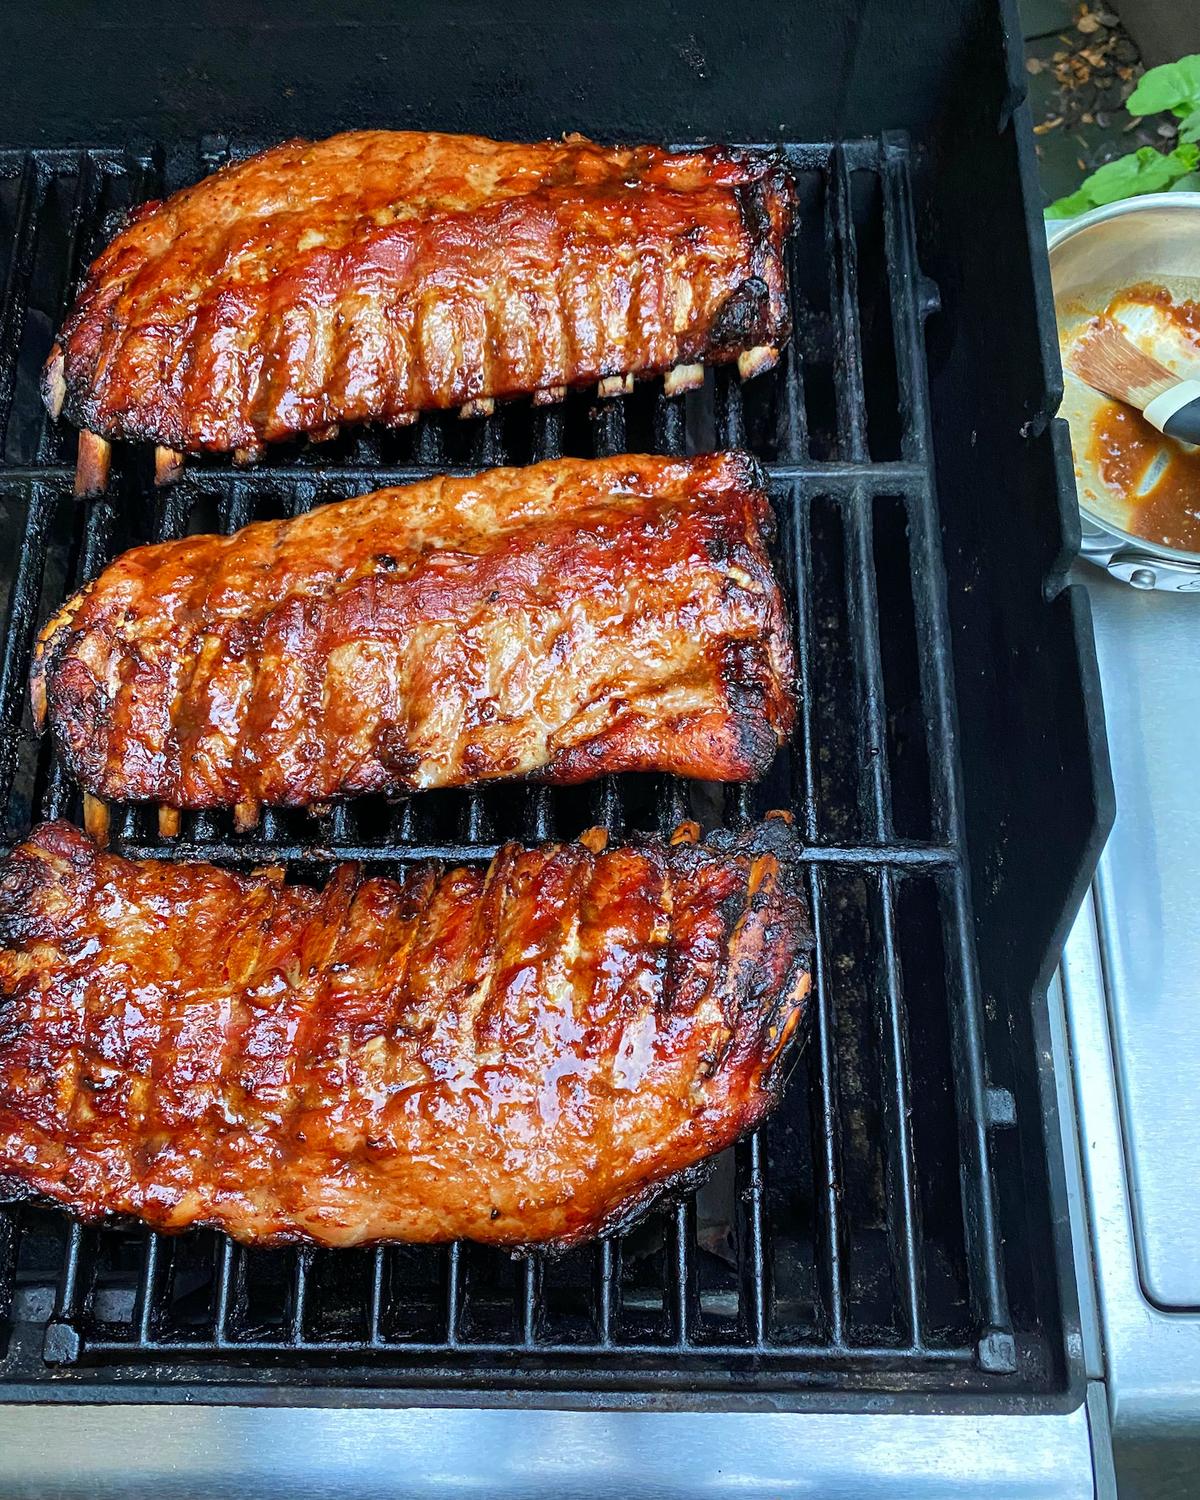 A simple spice rub drives in more flavor to these ribs, which get a final baste and garnish with a smoky chipotle-laced barbecue sauce. (Lynda Balslev for Tastefood)